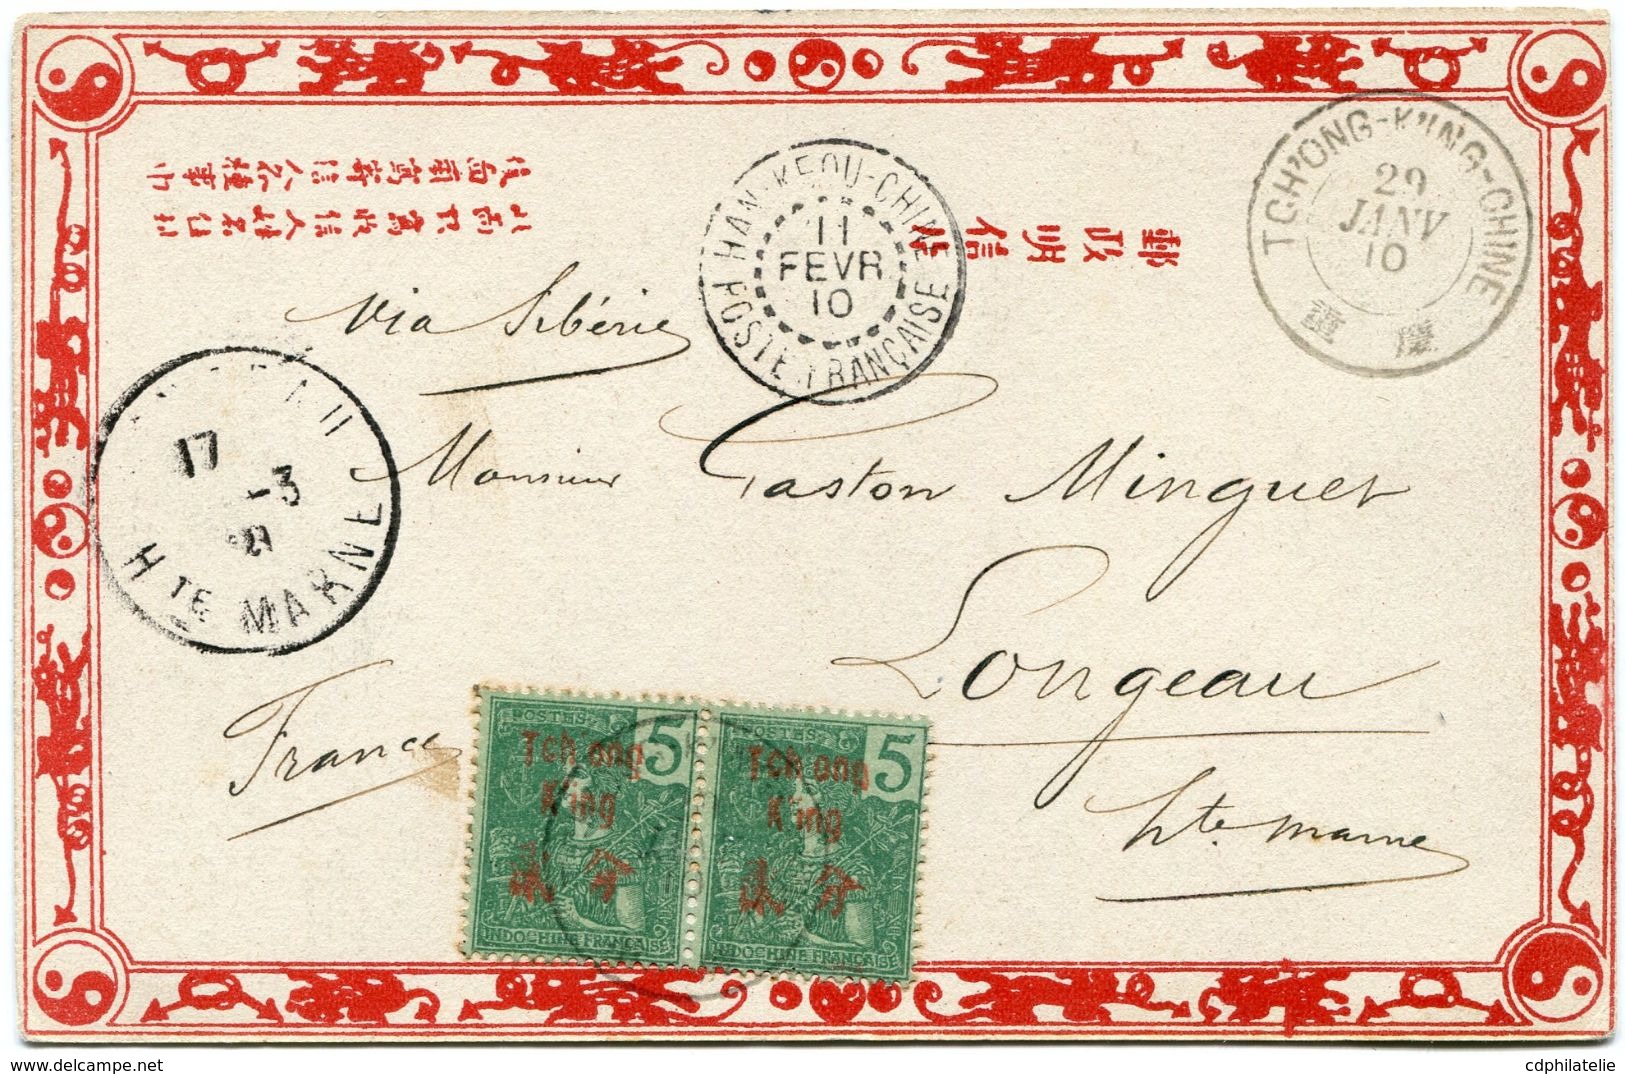 TCH'ONG-K'ING CARTE POSTALE DEPART TCH'ONG-K'ING-CHINE 29 JANV 10 POUR LA FRANCE - Lettres & Documents